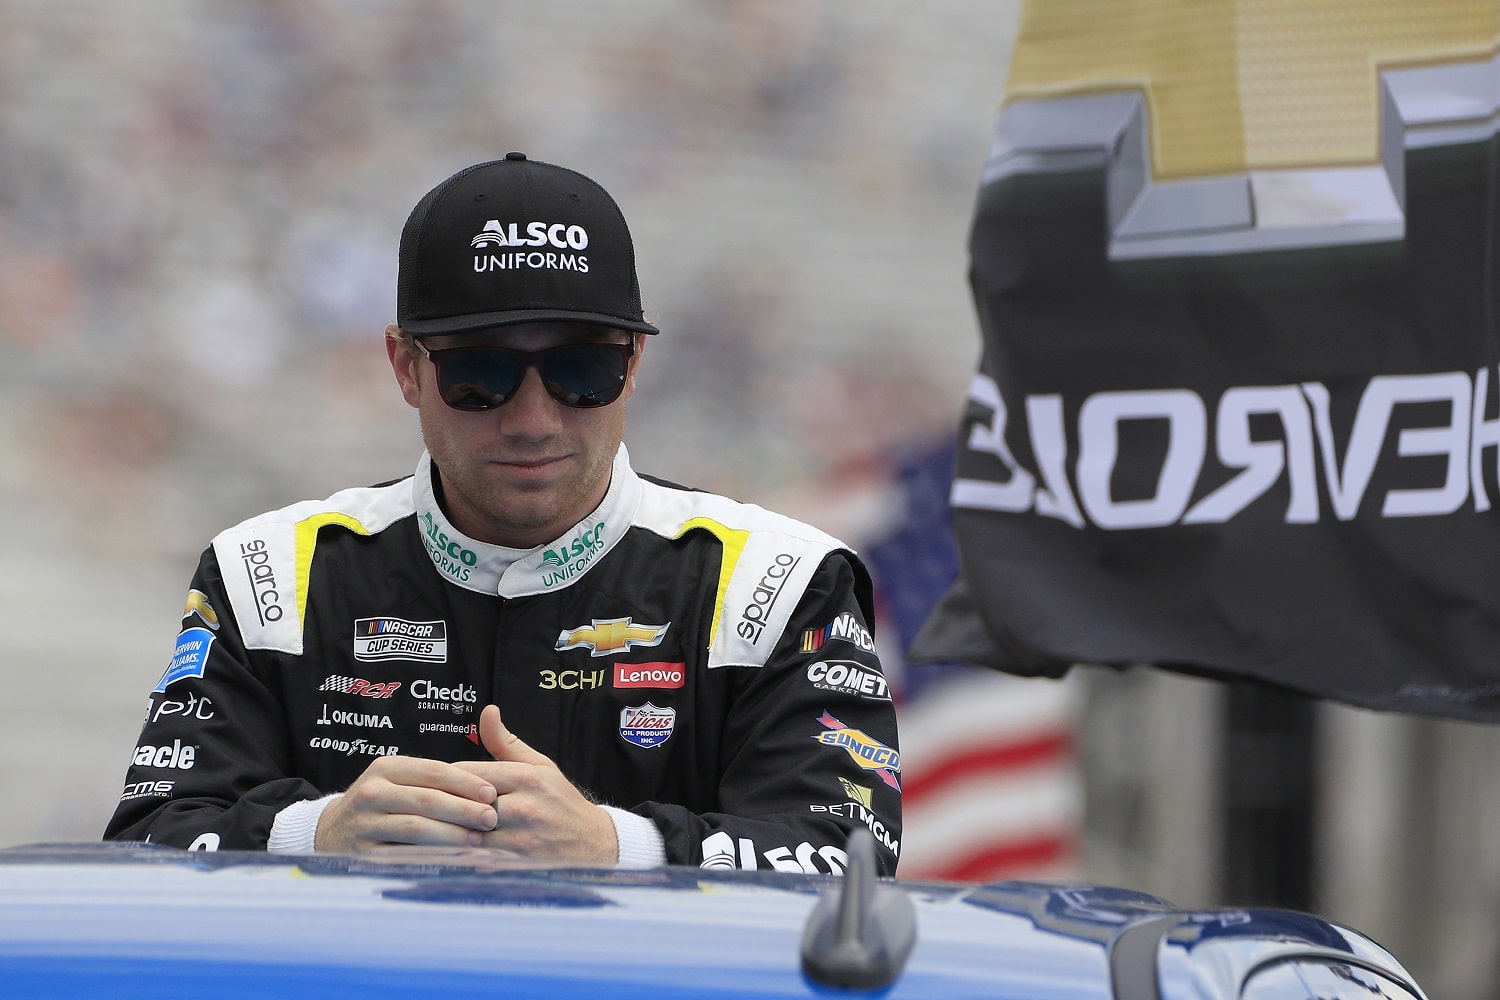 Tyler Reddick before the Quaker State 400 NASCAR race on July 10, 2022, at the Atlanta Motor Speedway. | David J. Griffin/Icon Sportswire via Getty Images